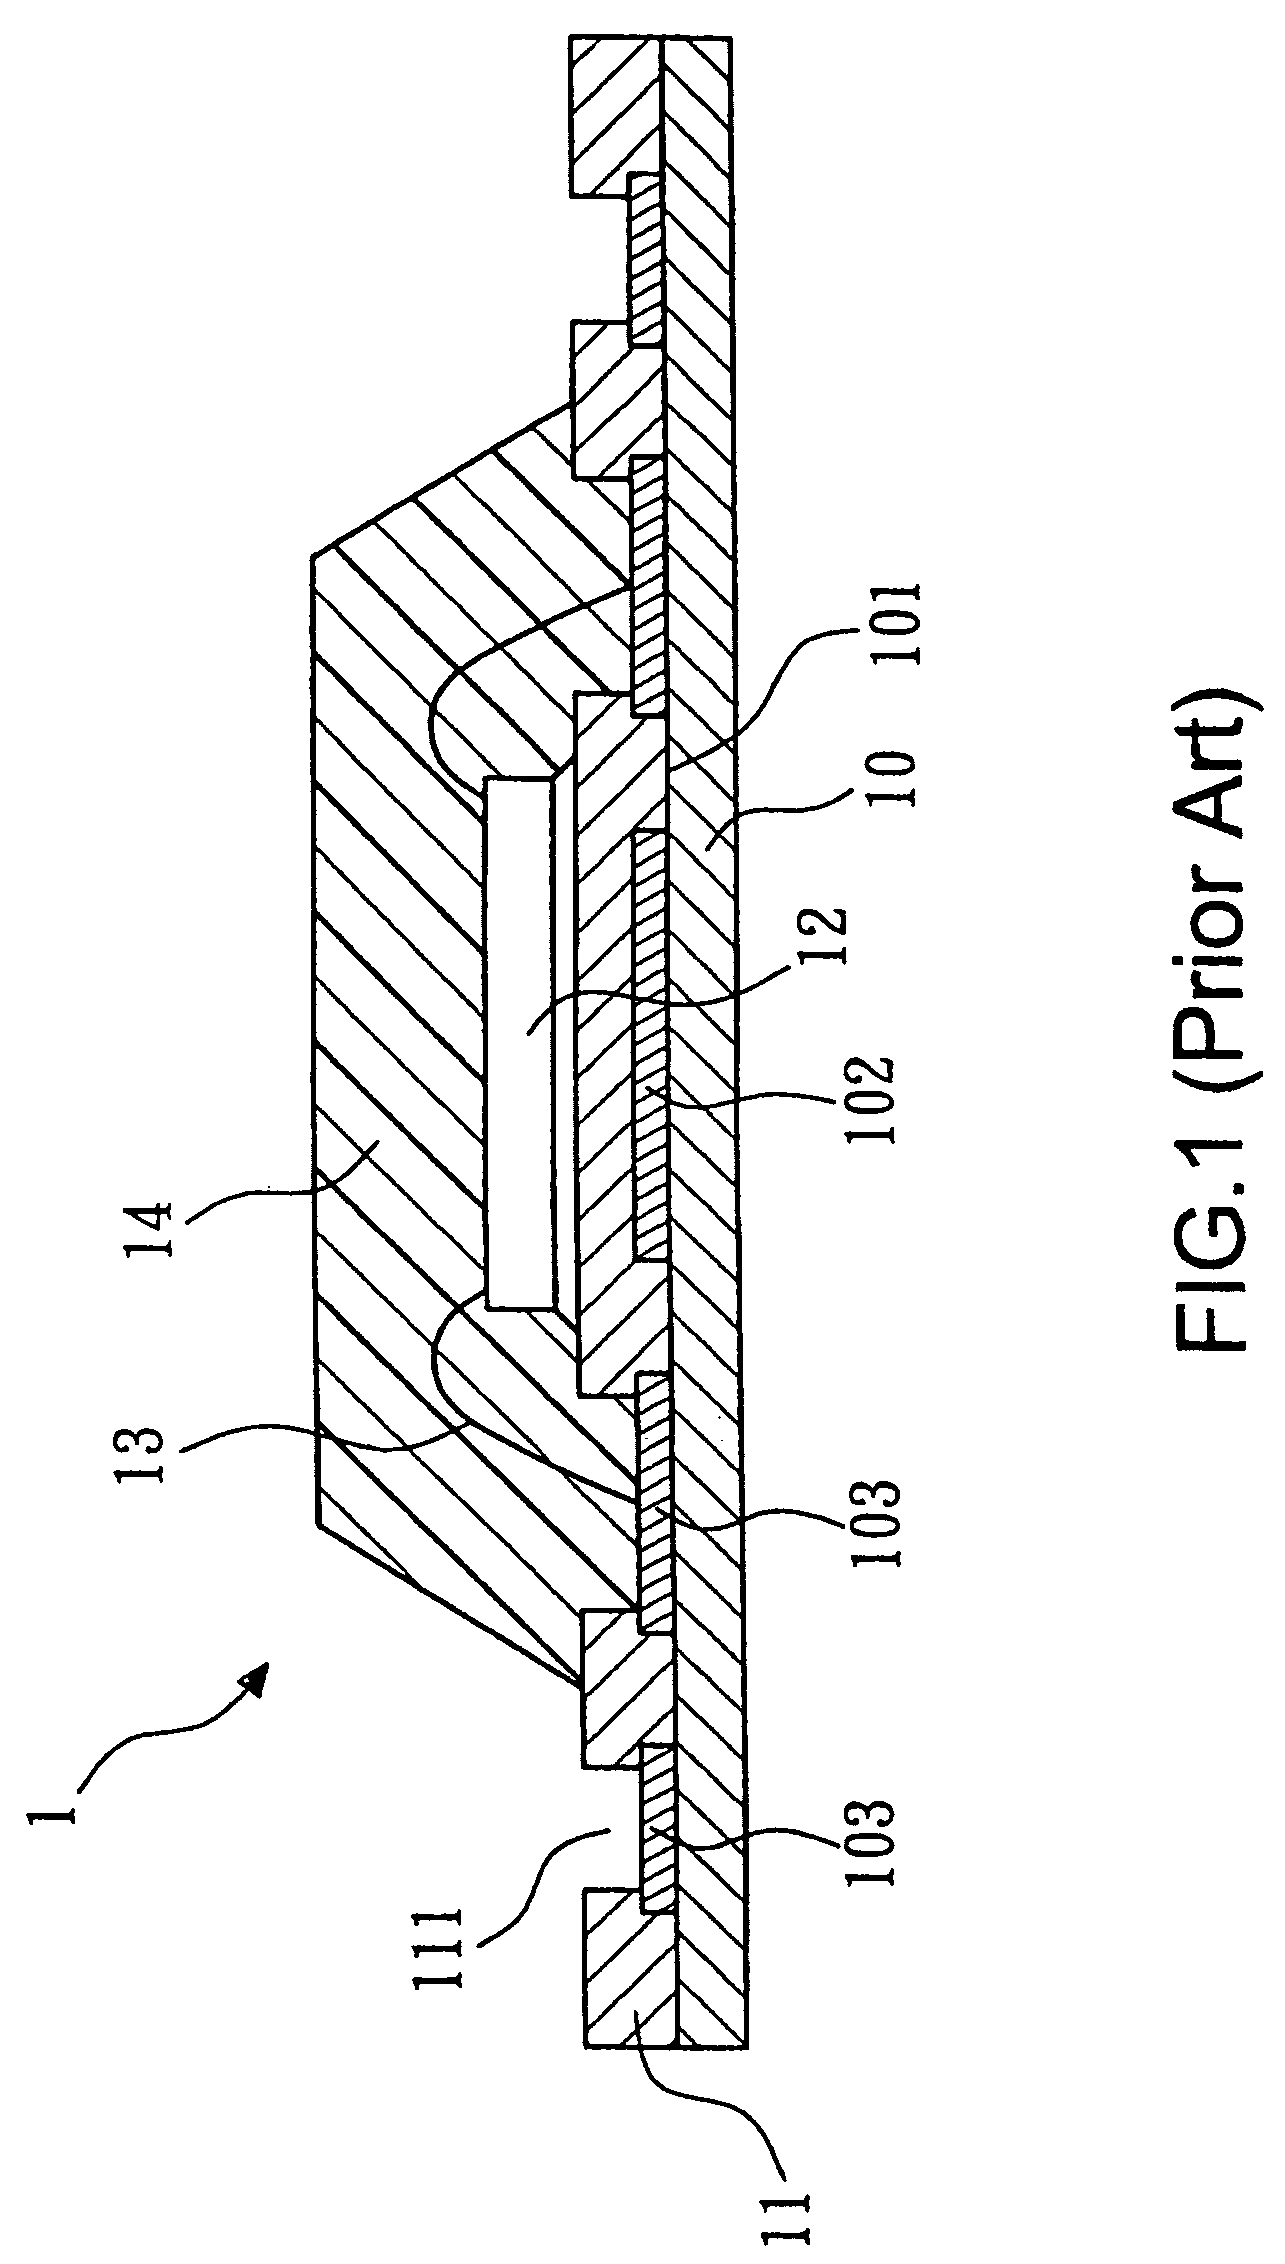 Substrate structure having a solder mask and a process for making the same